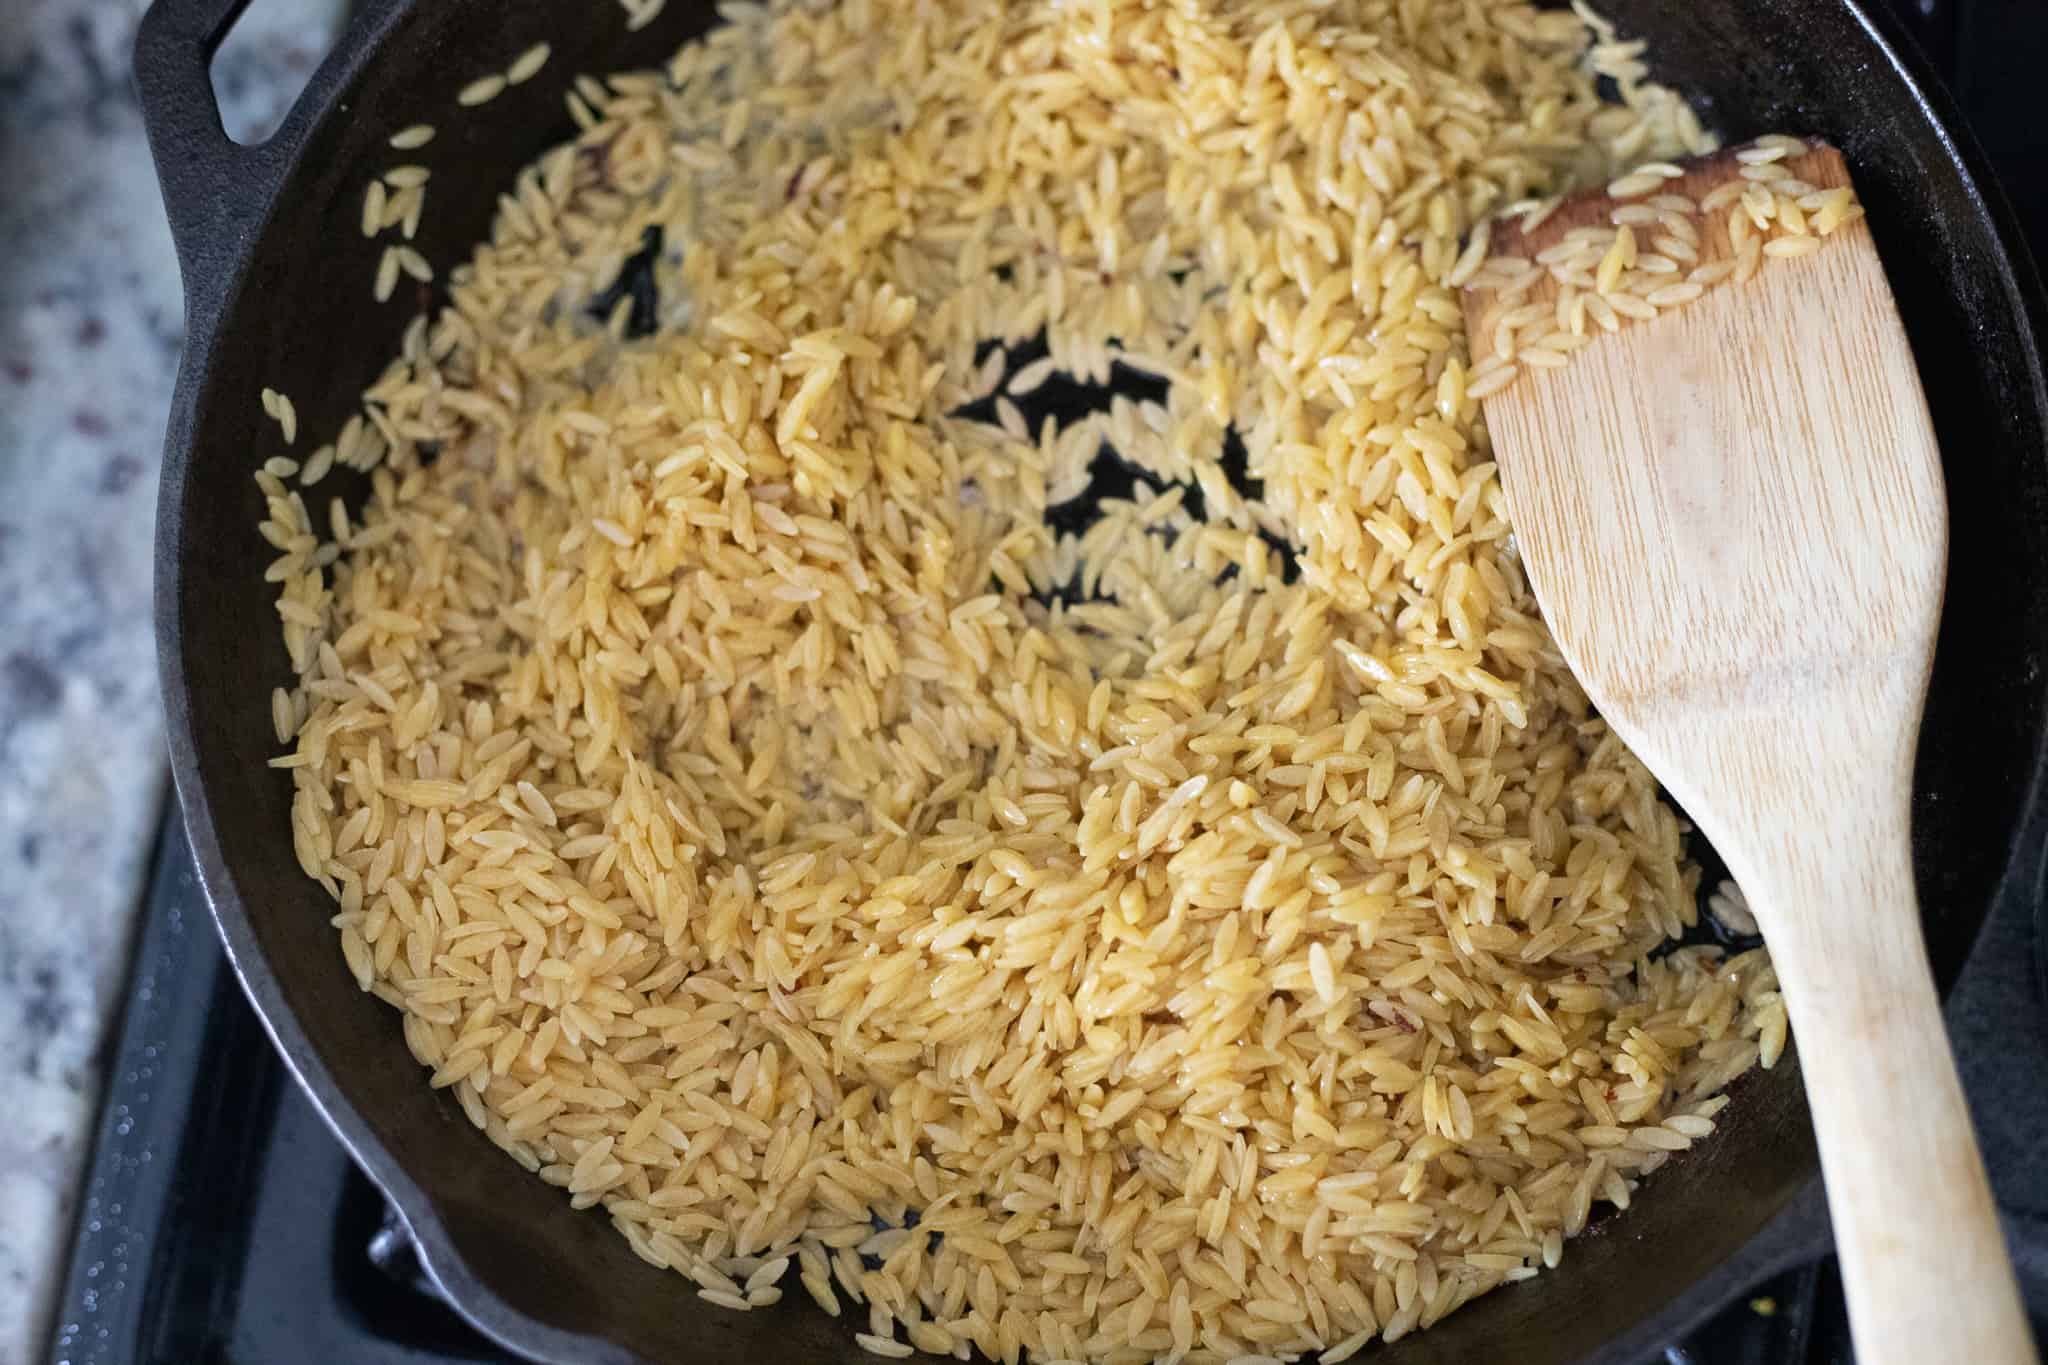 Orzo cooking in a pan. The Hangry Economist.